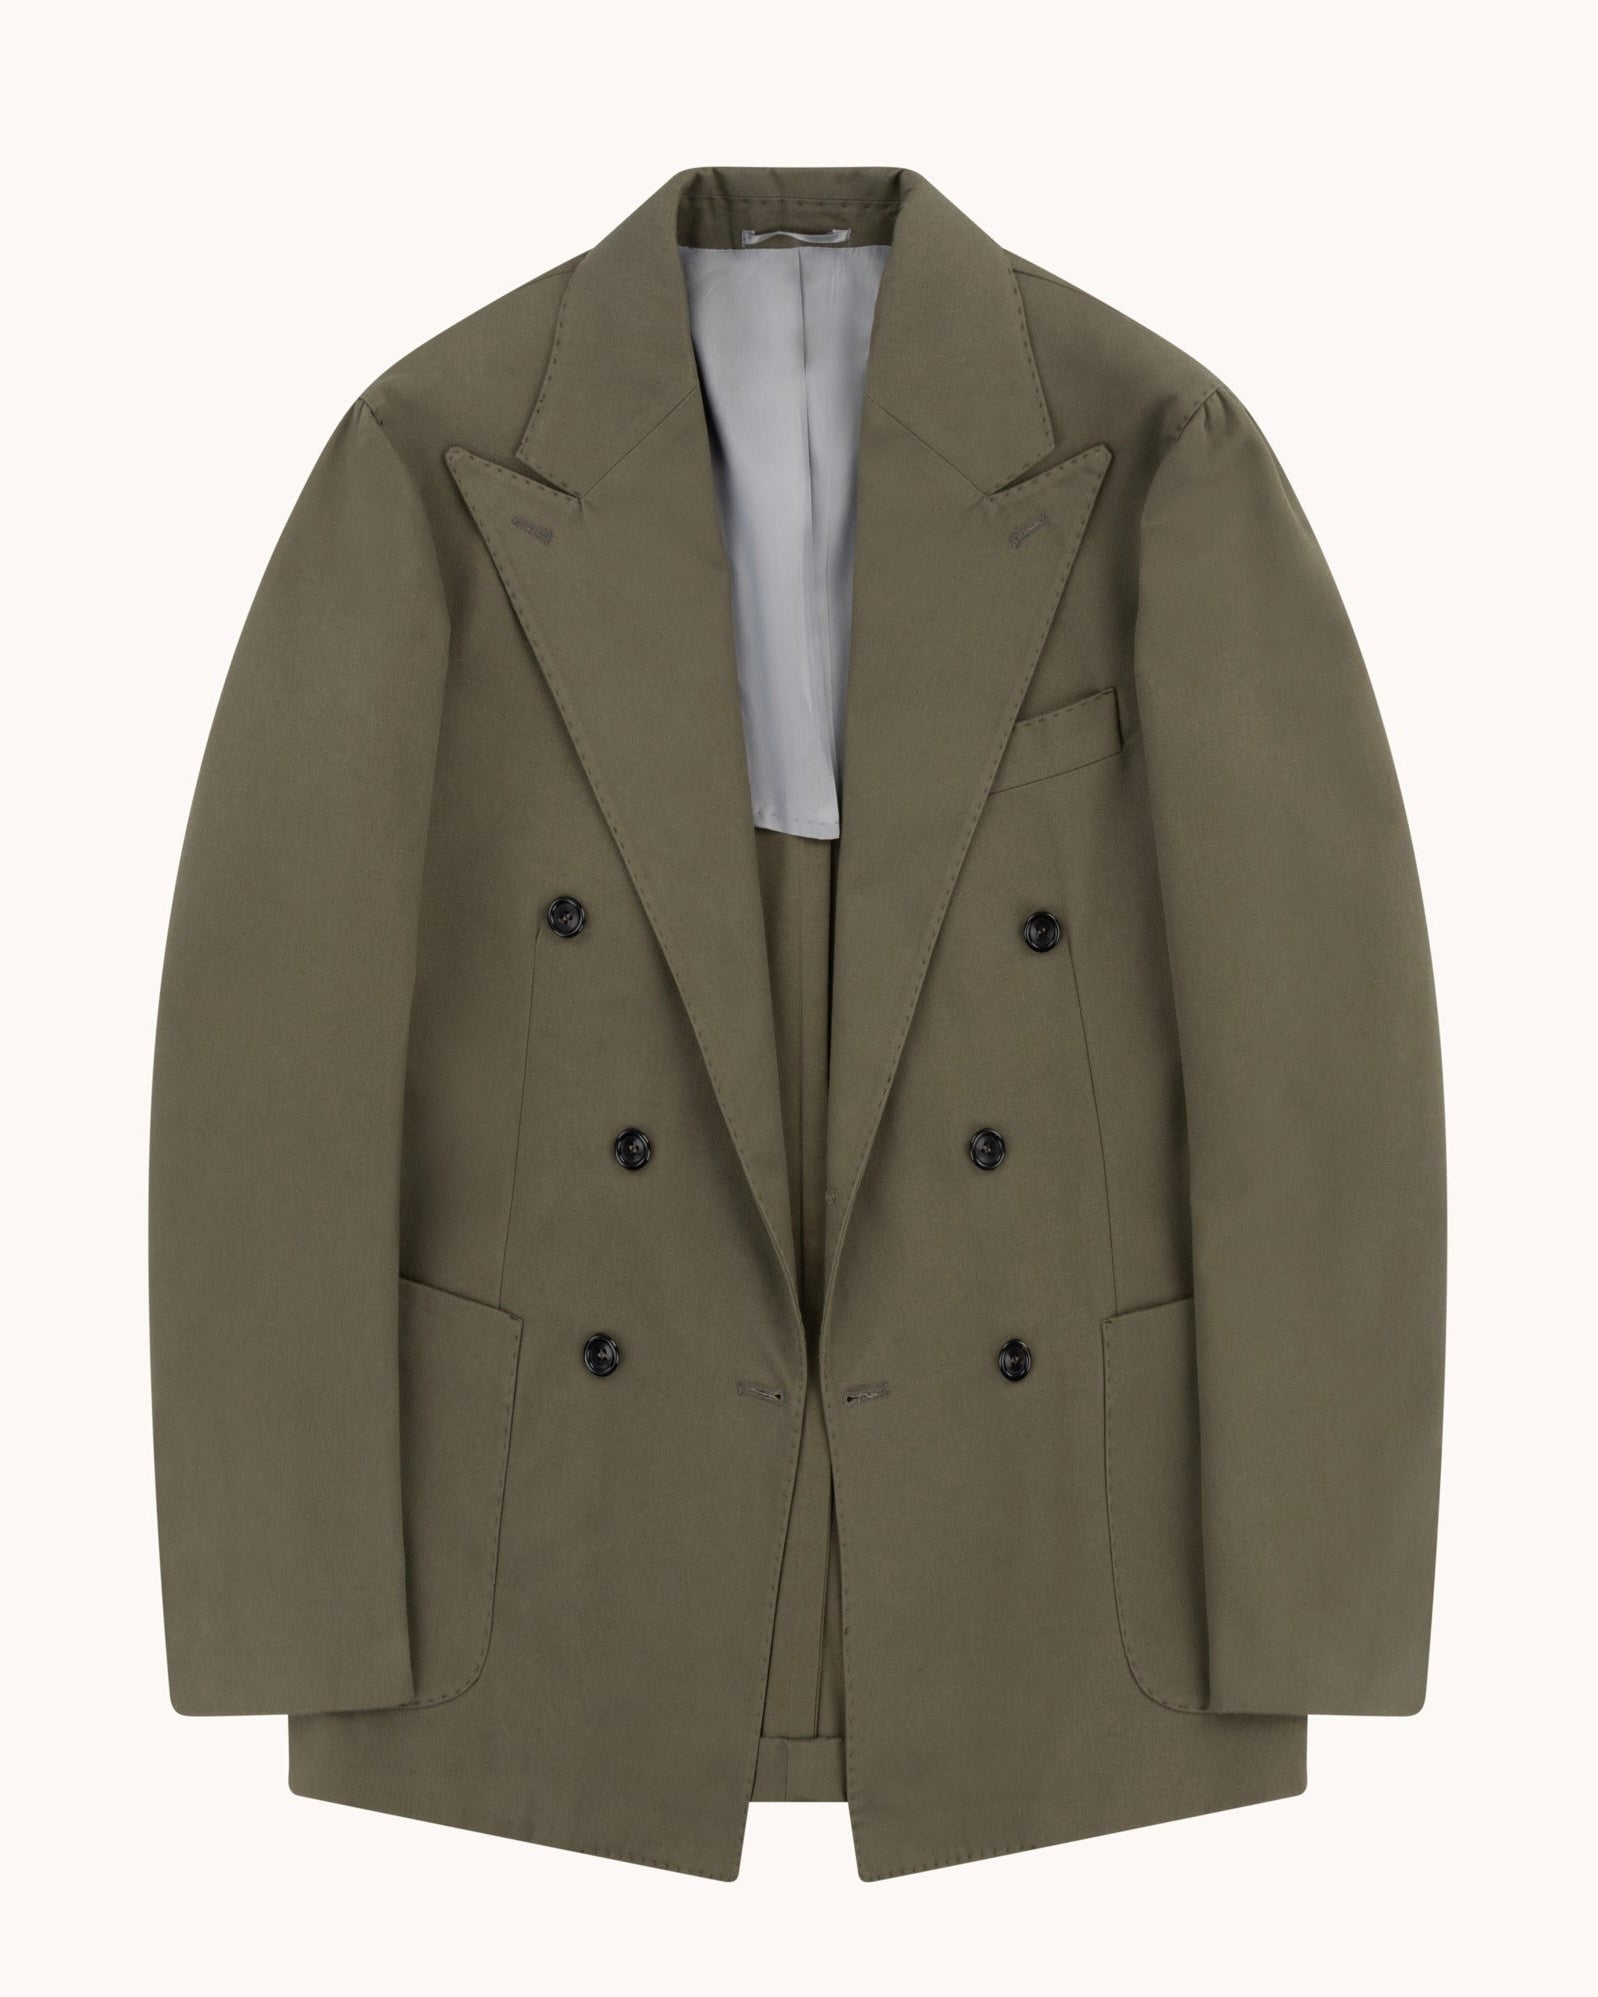 Double Breasted Sport Jacket - Olive Brushed Cotton